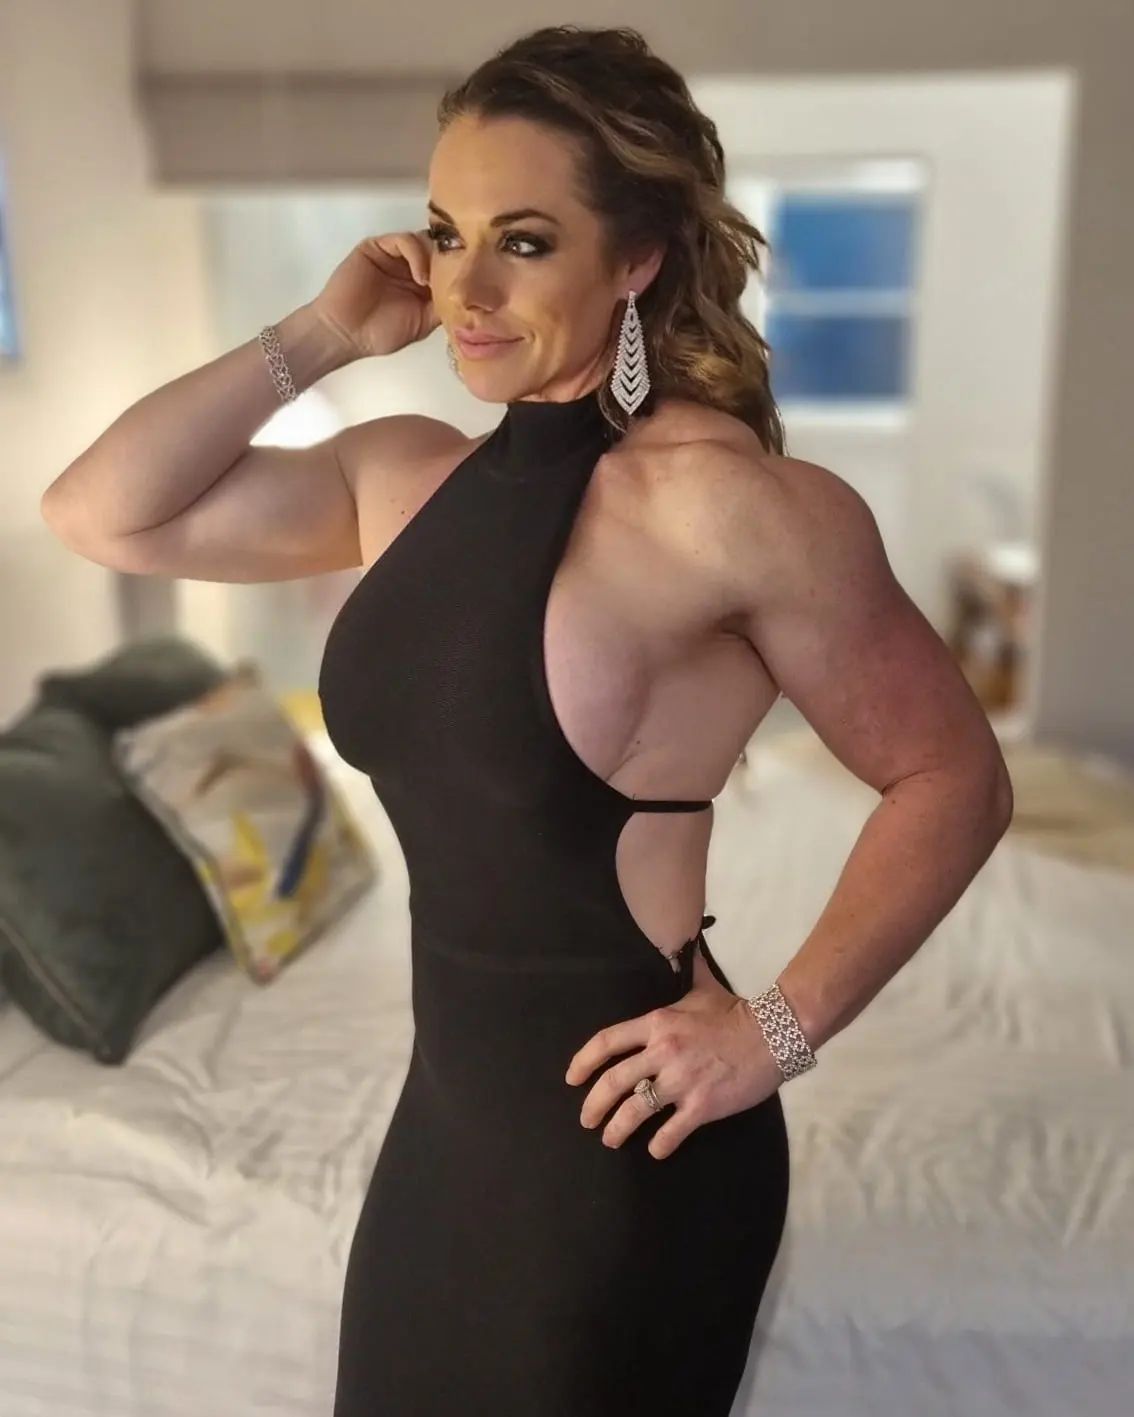 Lana lady lifter only fans